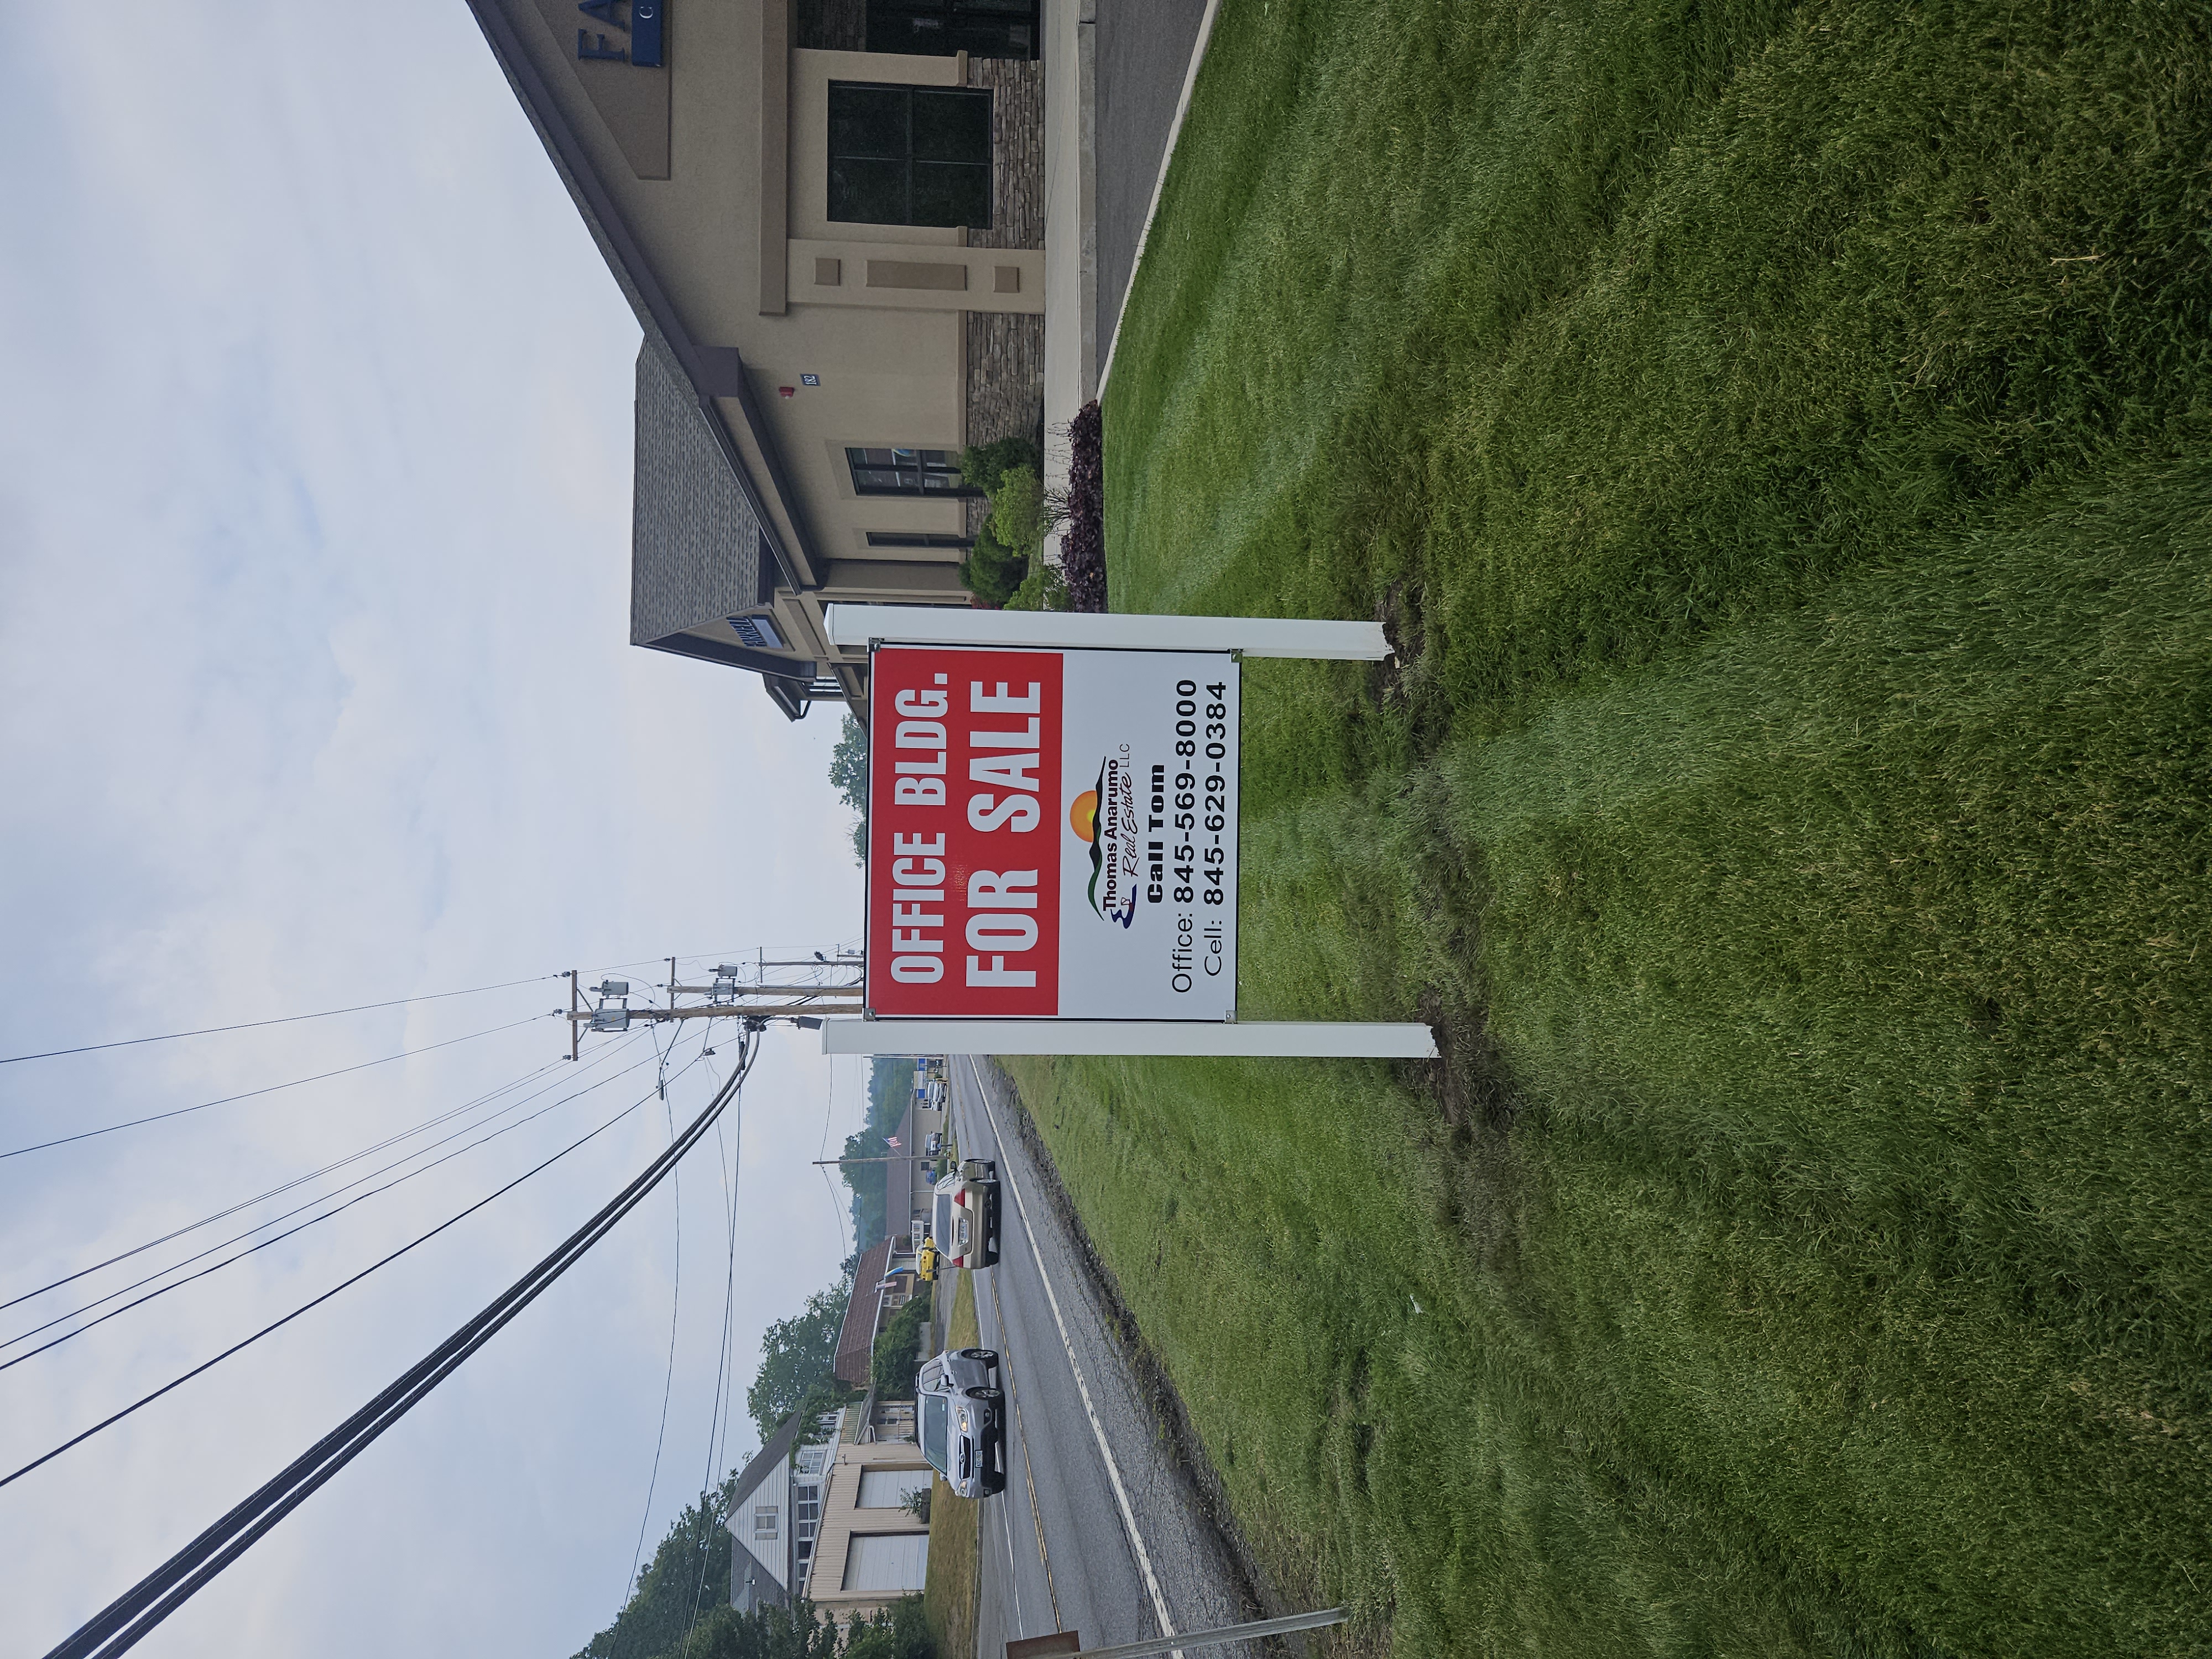 Real Estate / Yard / Campaign / Site Signs